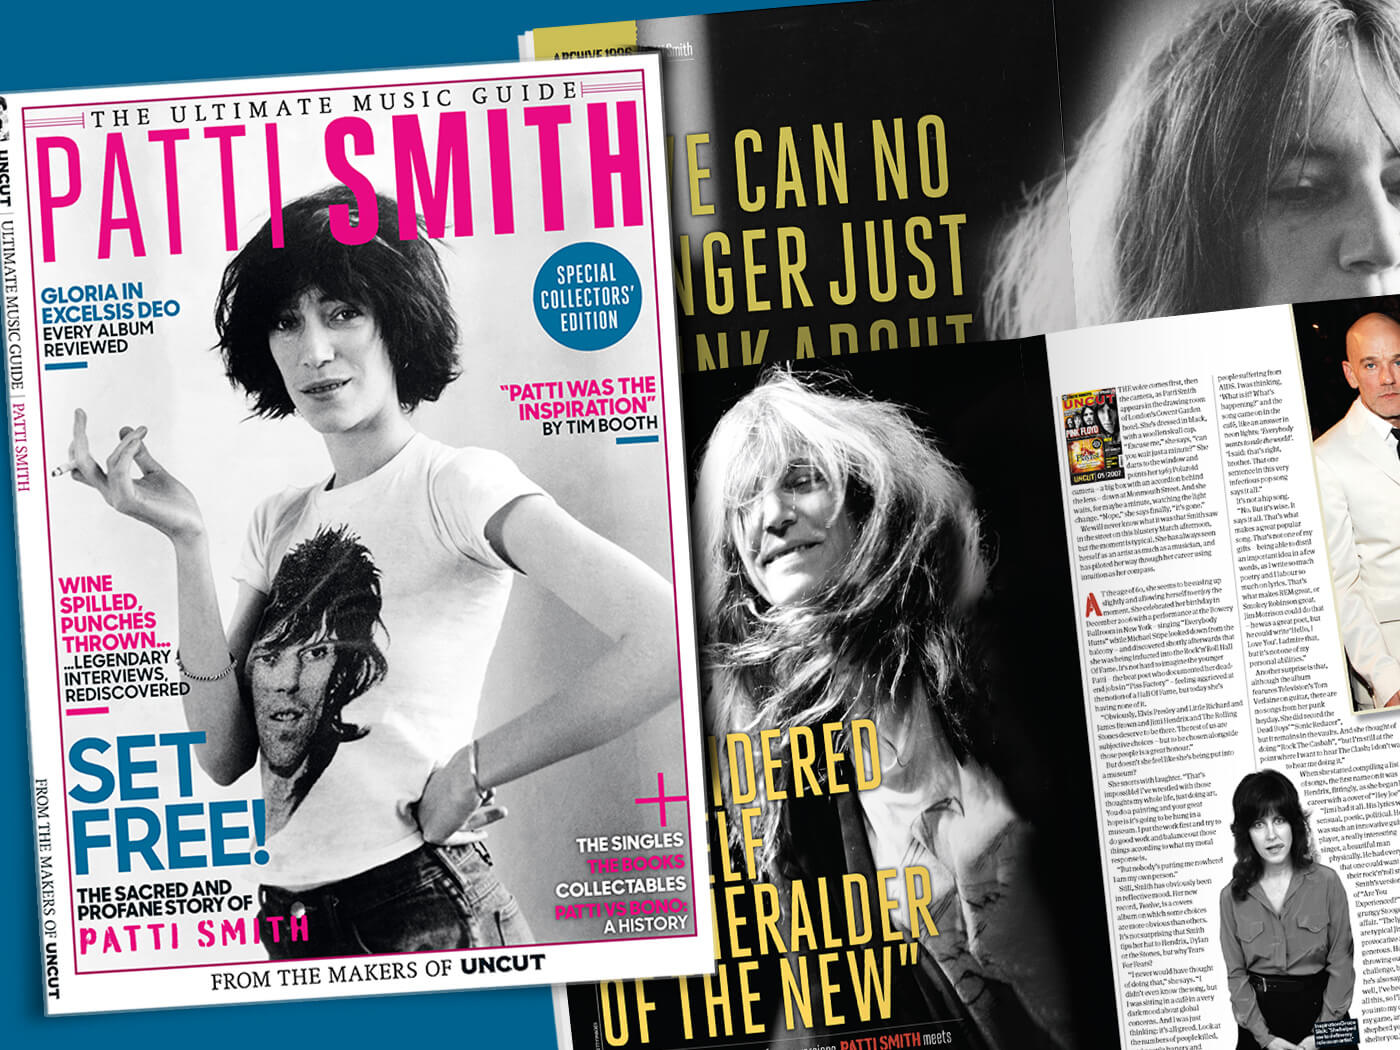 Introducing the Deluxe Ultimate Music Guide to Patti Smith